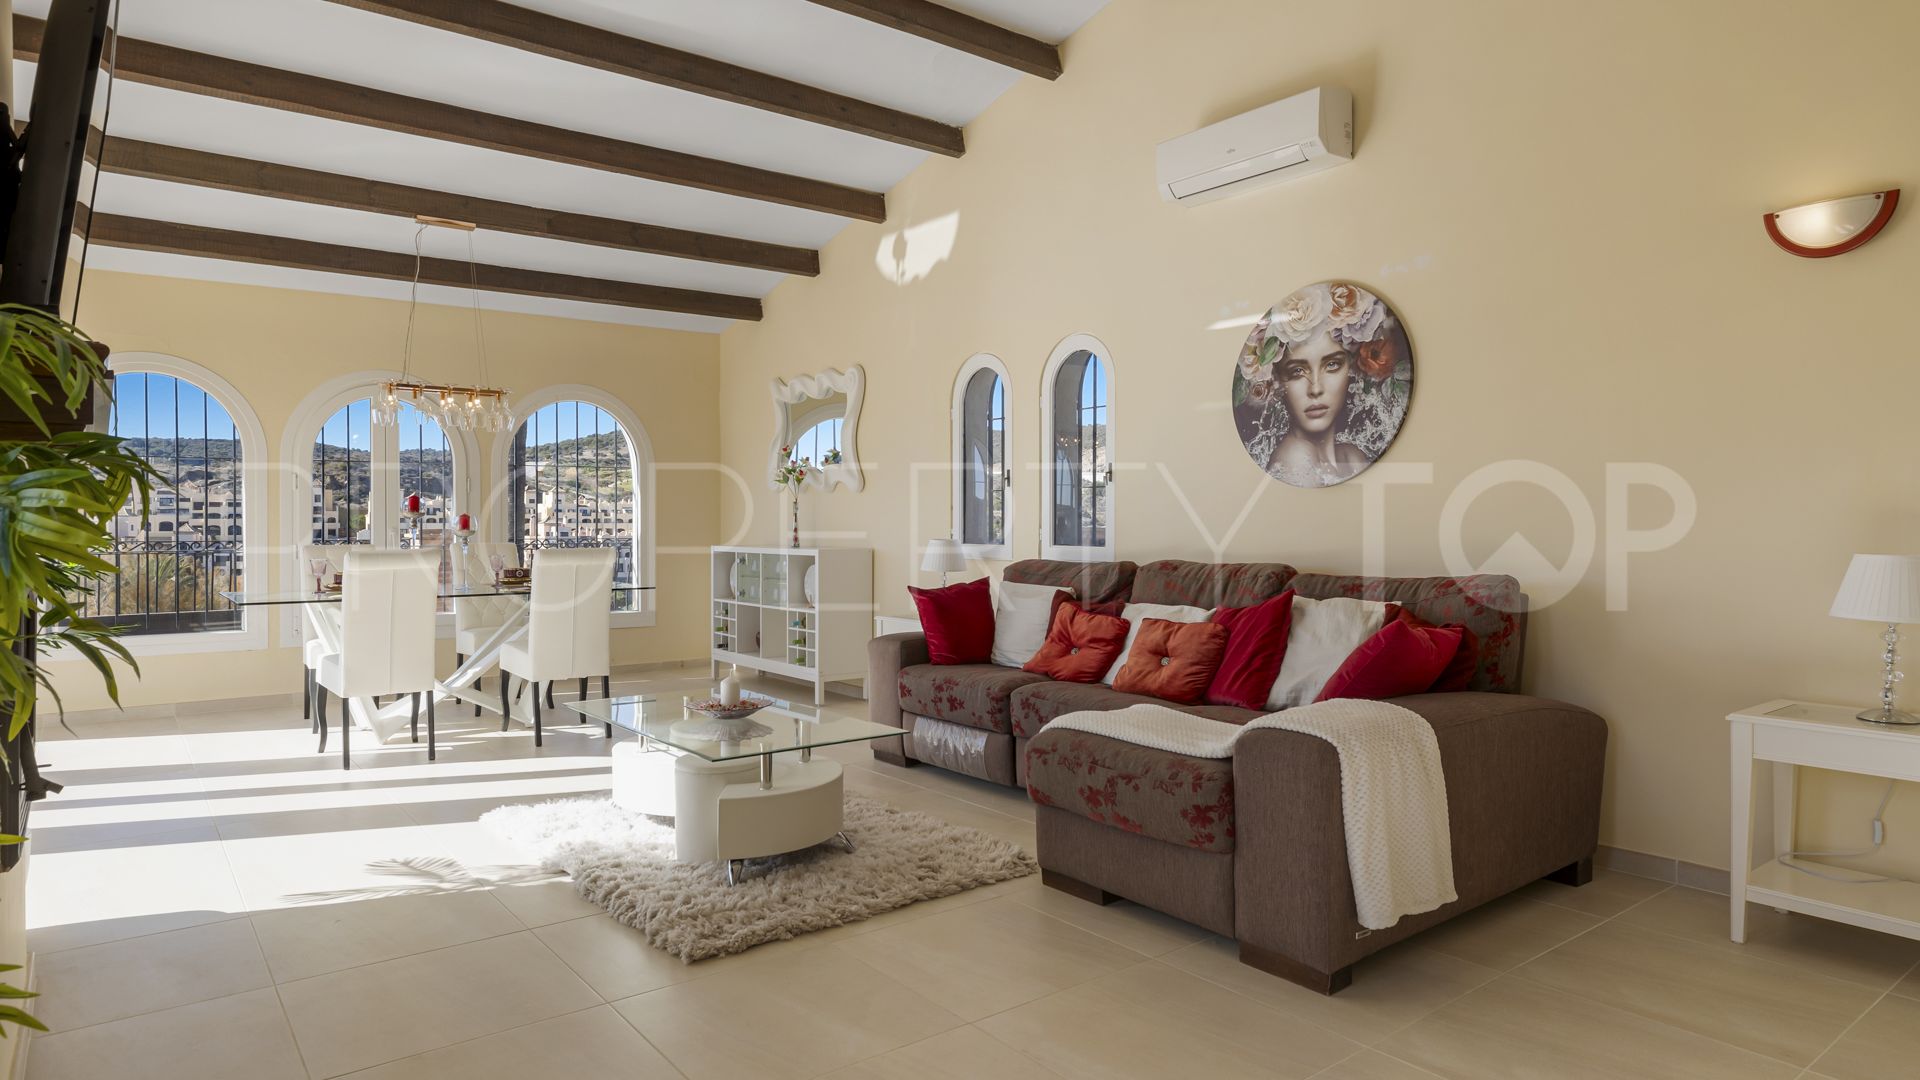 For sale villa in Valle Romano with 4 bedrooms